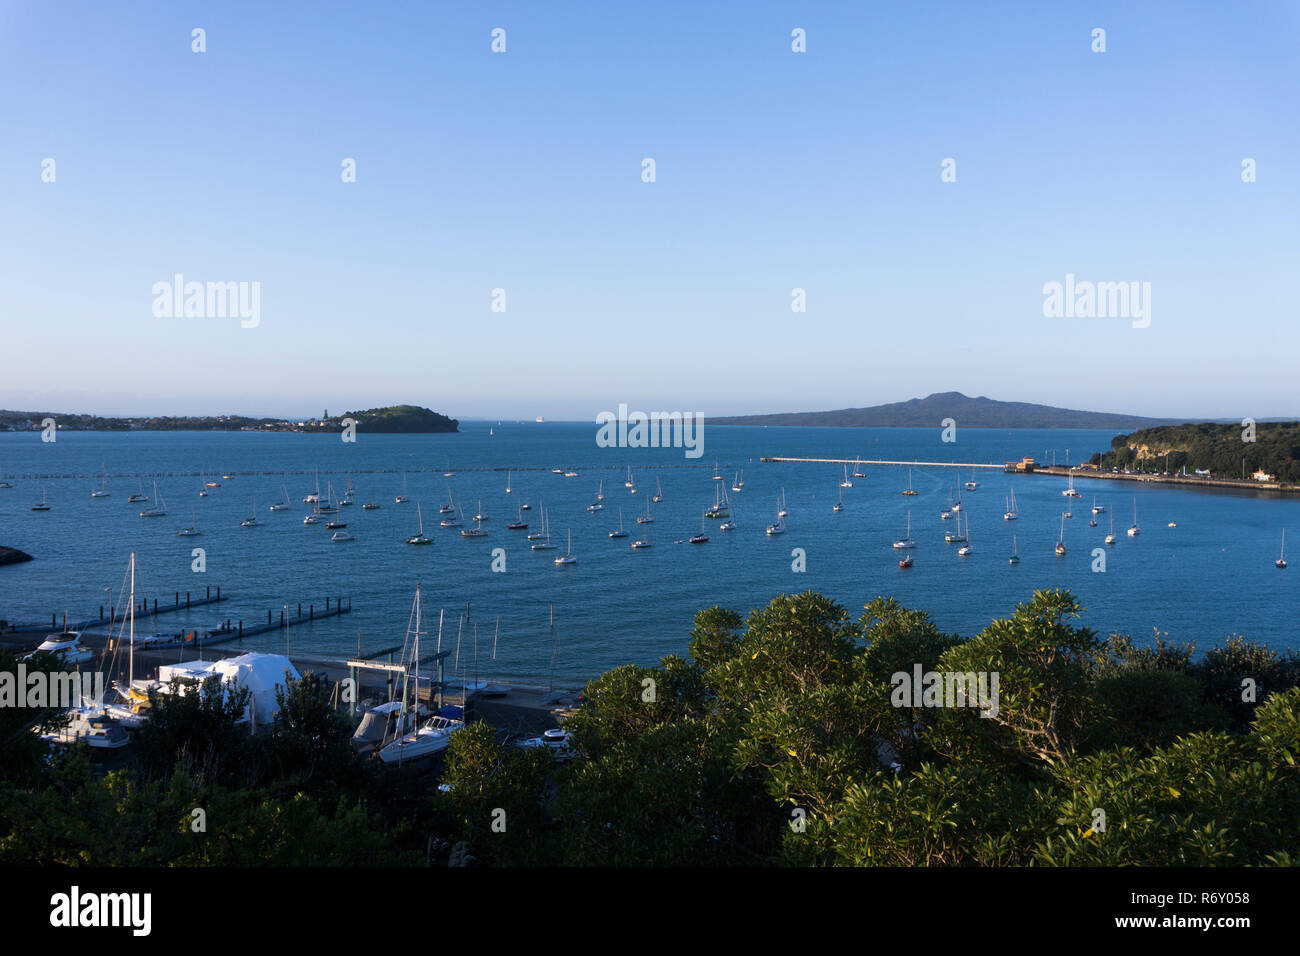 Auckland, New Zealand. View of Auckland Harbour from Paritai Drive Stock Photo